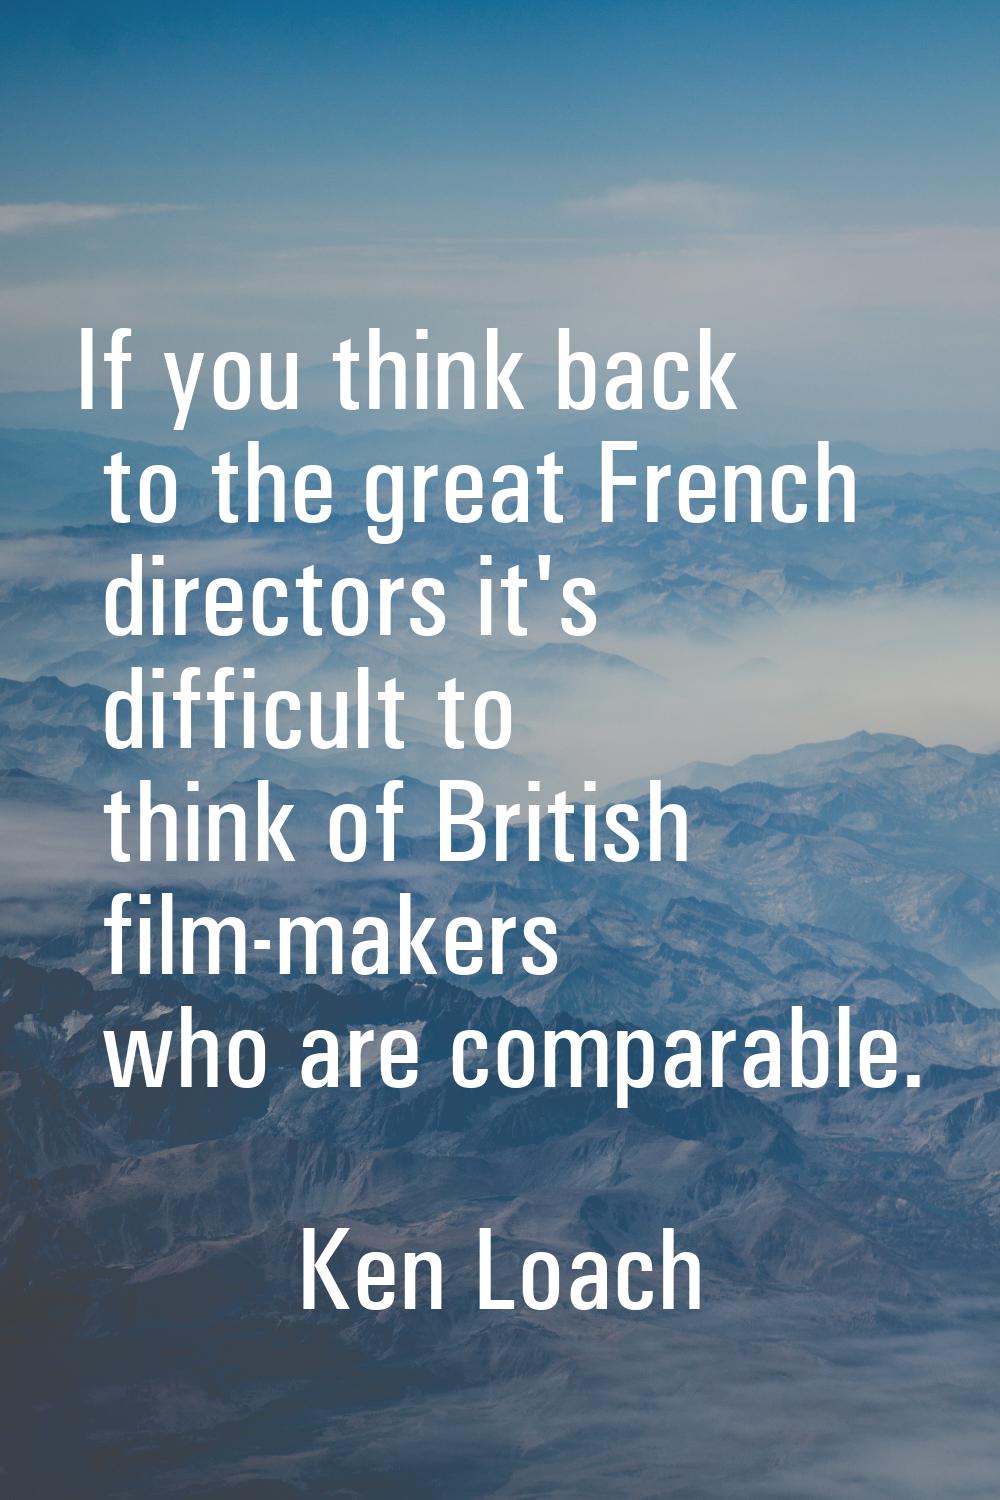 If you think back to the great French directors it's difficult to think of British film-makers who 